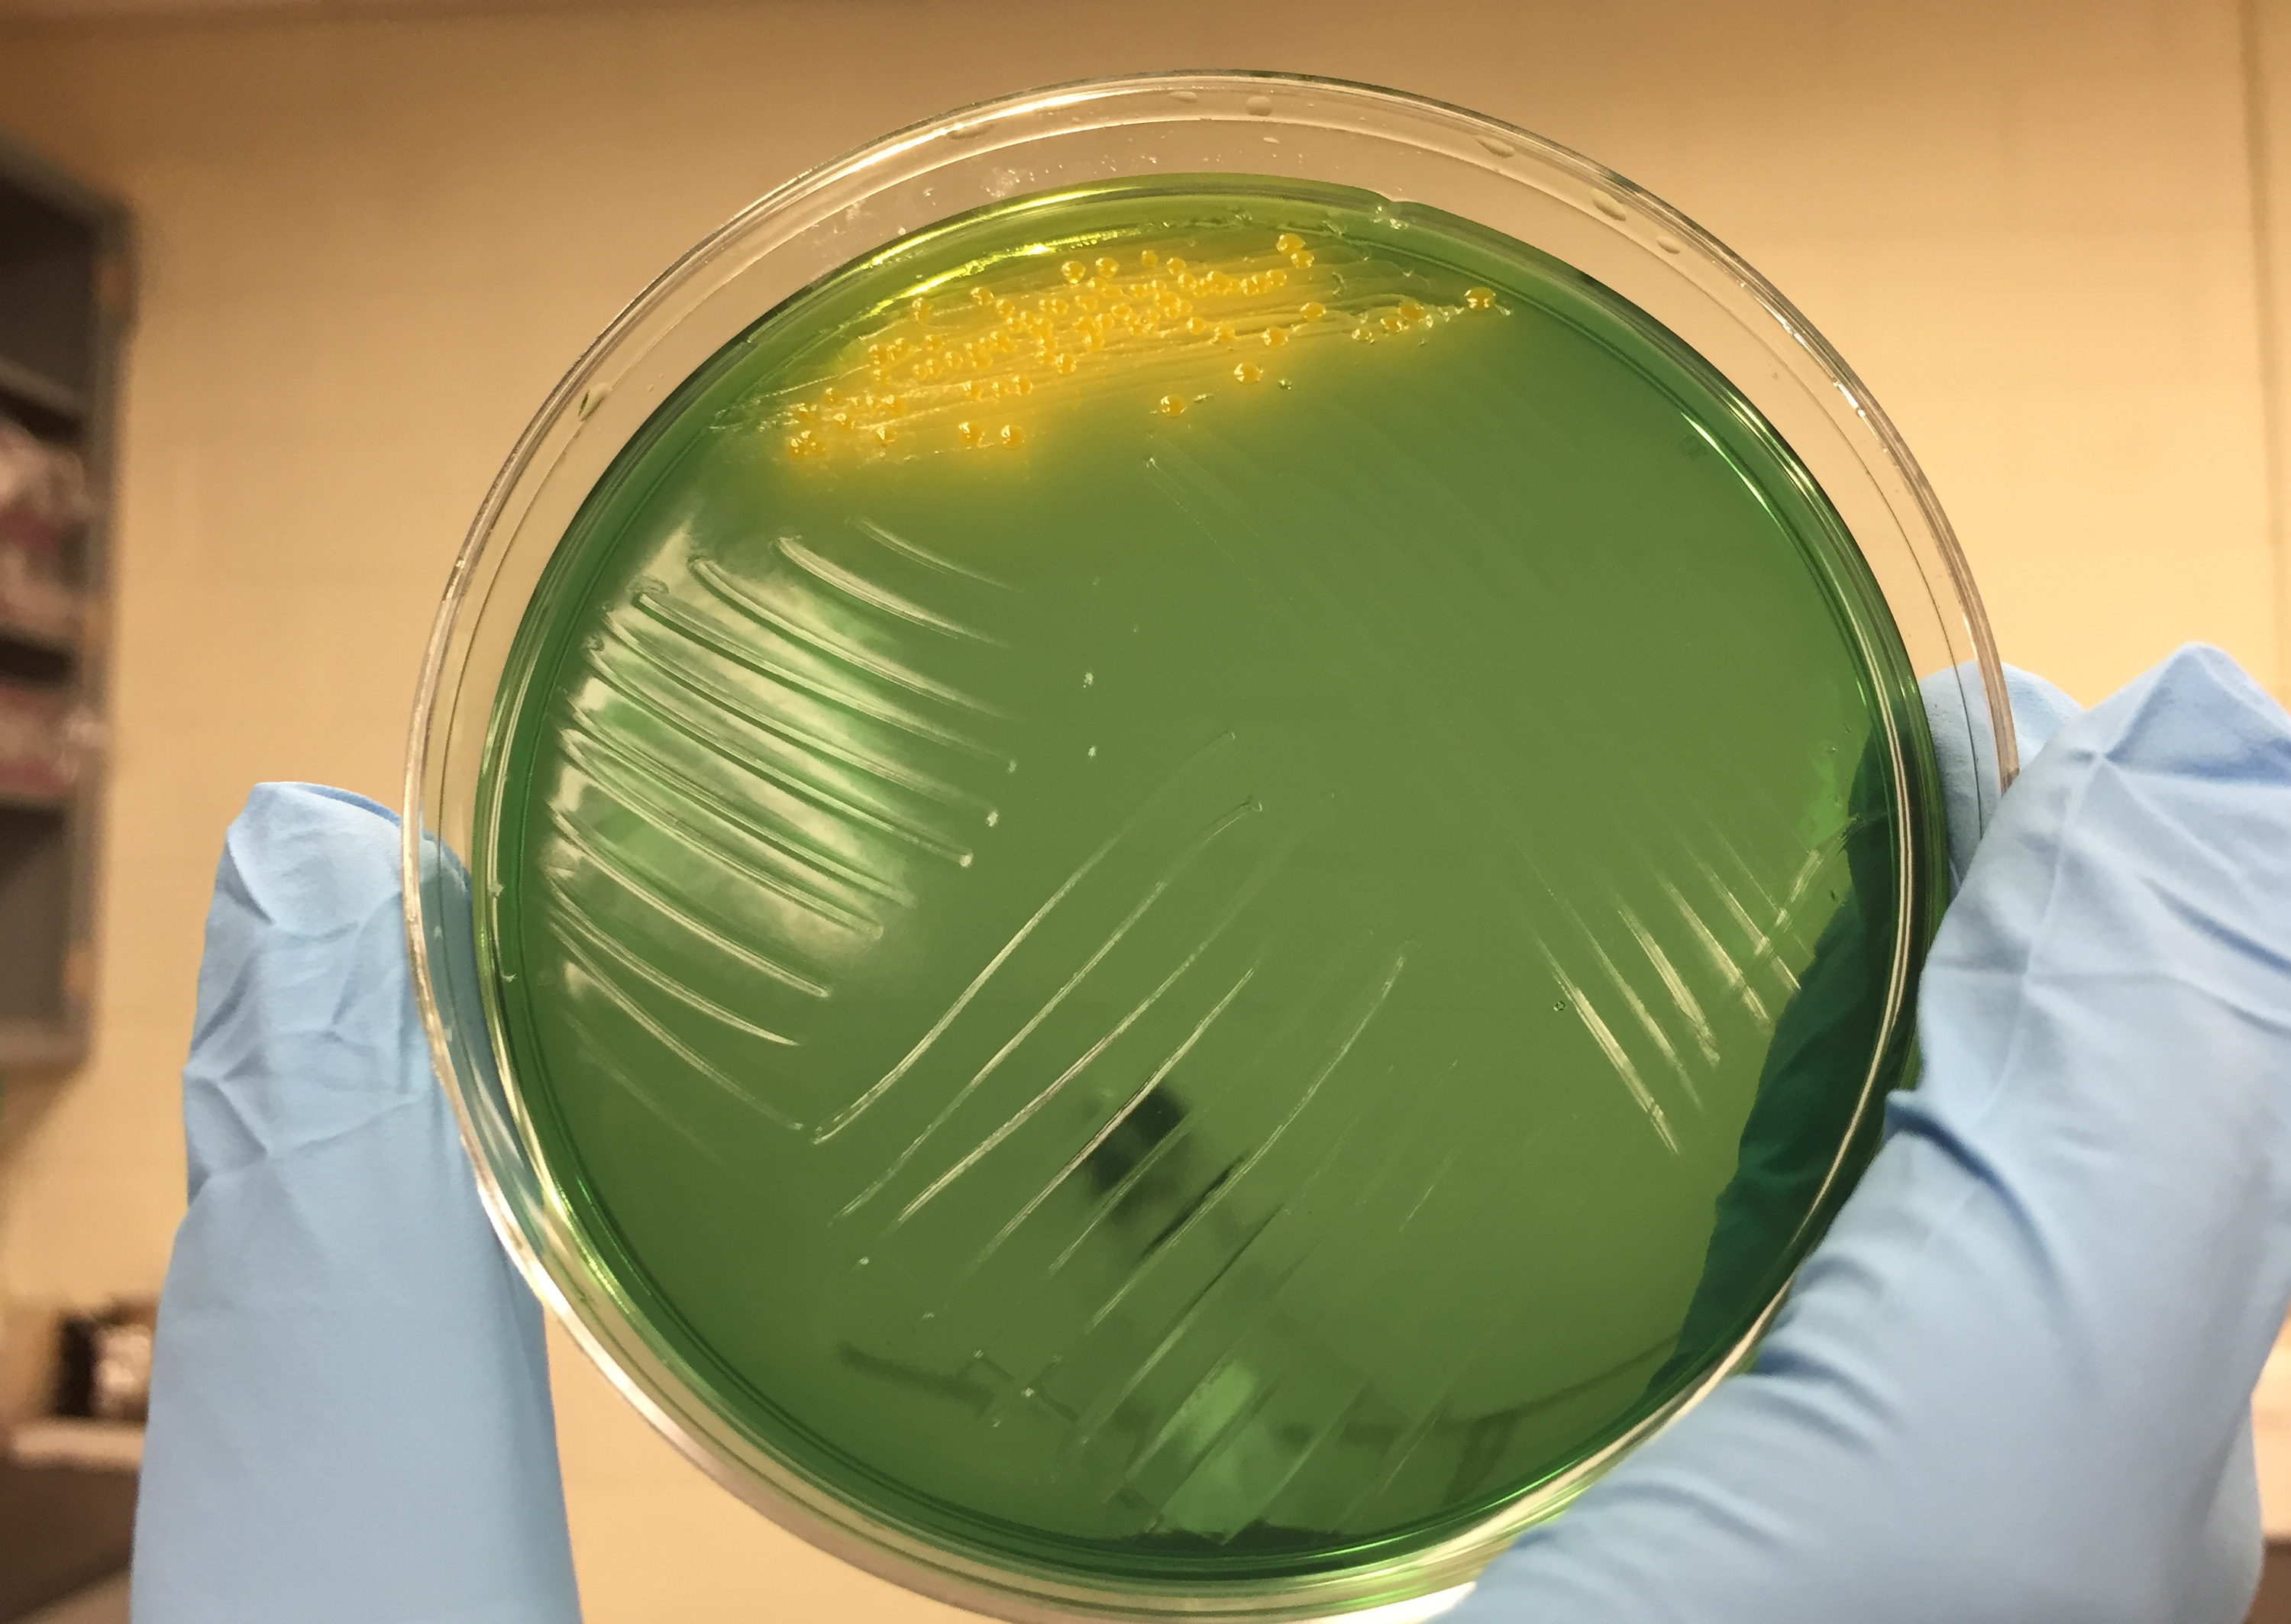 Image shows cholera colonies (yellow) growing on an agar plate. Growth of the bacterium was part of research into the diversity and resourcefulness of the bacterium. (Credit: John Toon, Georgia Tech)